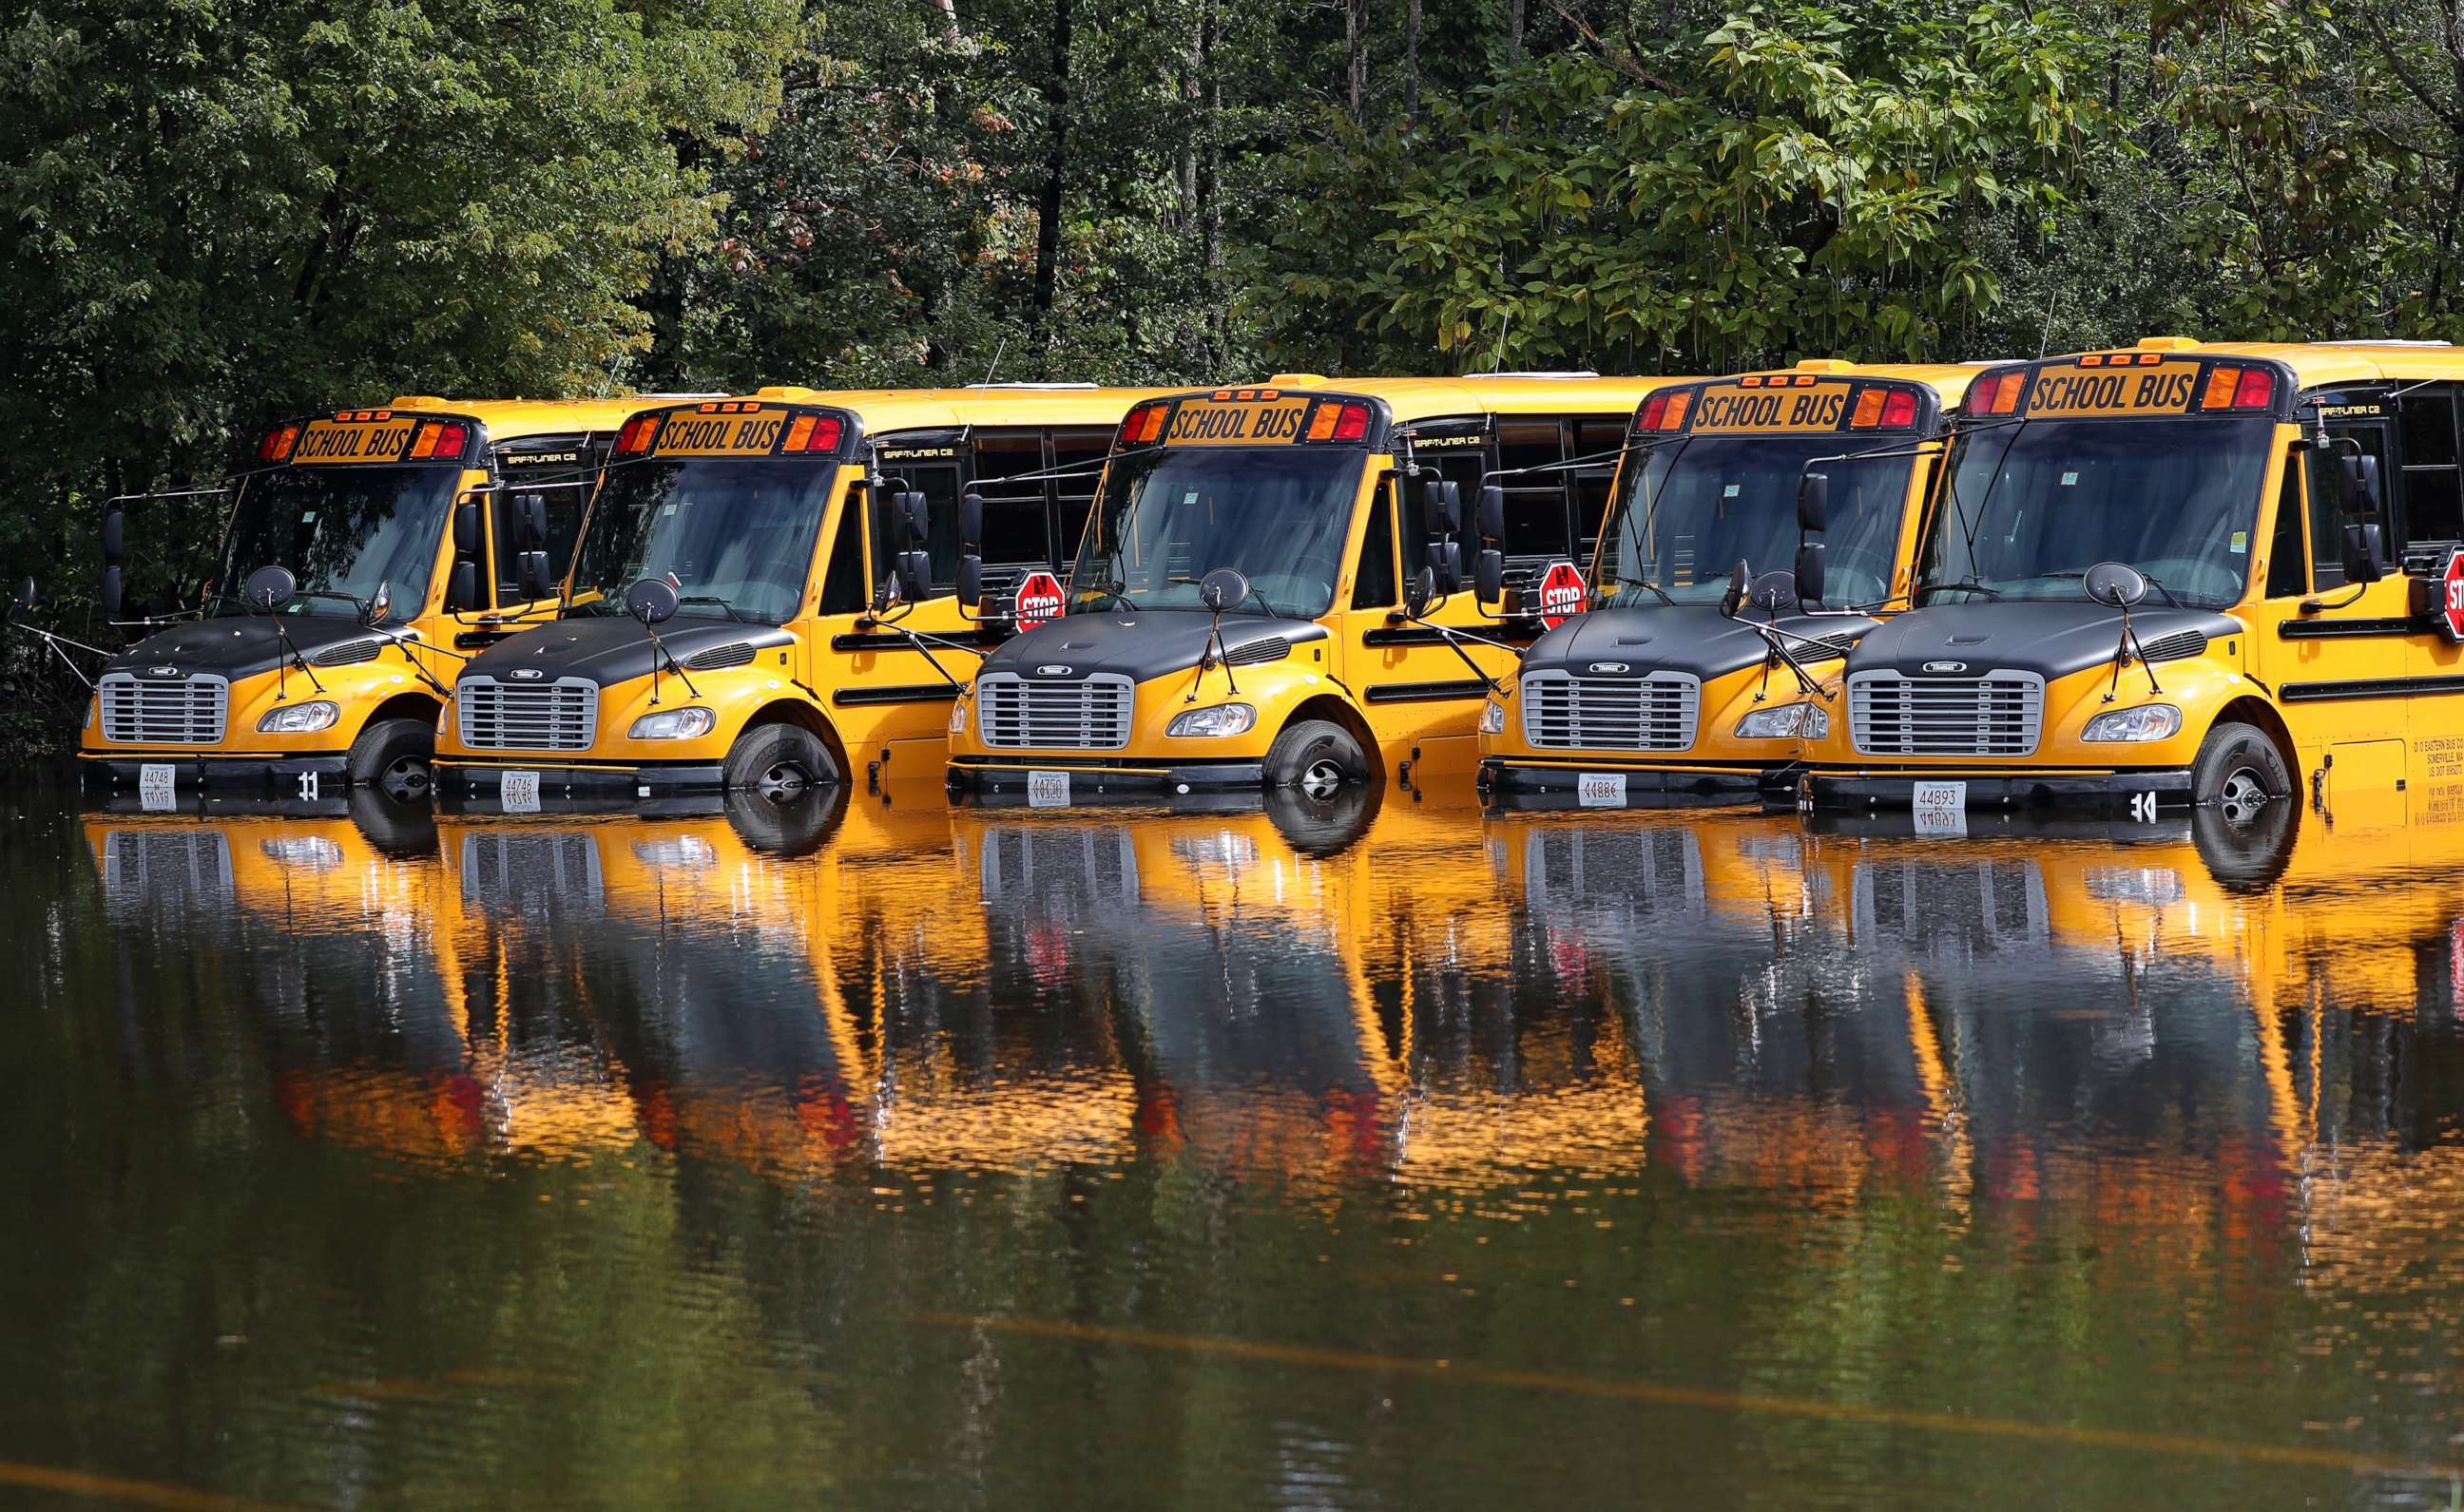 PHOTO: Waltham school busses sit in floodwaters in Waltham, Mass., Sept. 2, 2021, after heavy rainfall from the remnants of Hurricane Ida.